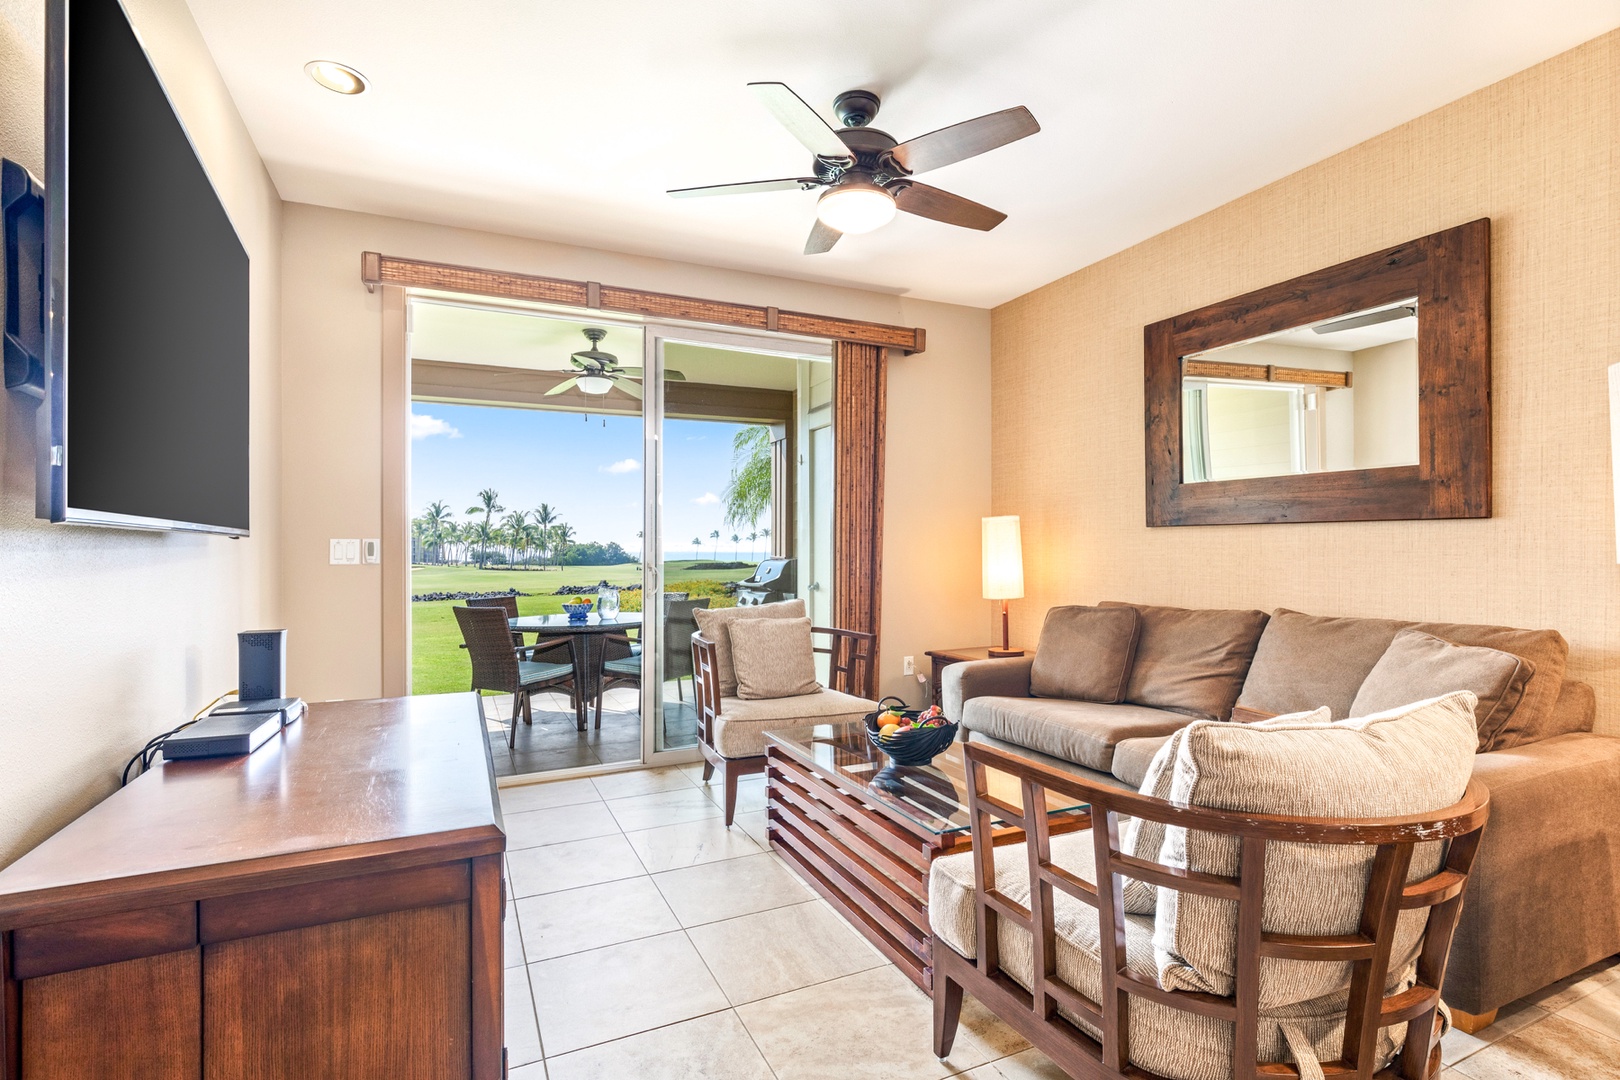 Waikoloa Vacation Rentals, 2BD Hali'i Kai 12C at Waikoloa Resort - Closer view of living room seating. Sleeper sofa can accommodate up to 2 extra guests (must be approved and extra guest fees apply).